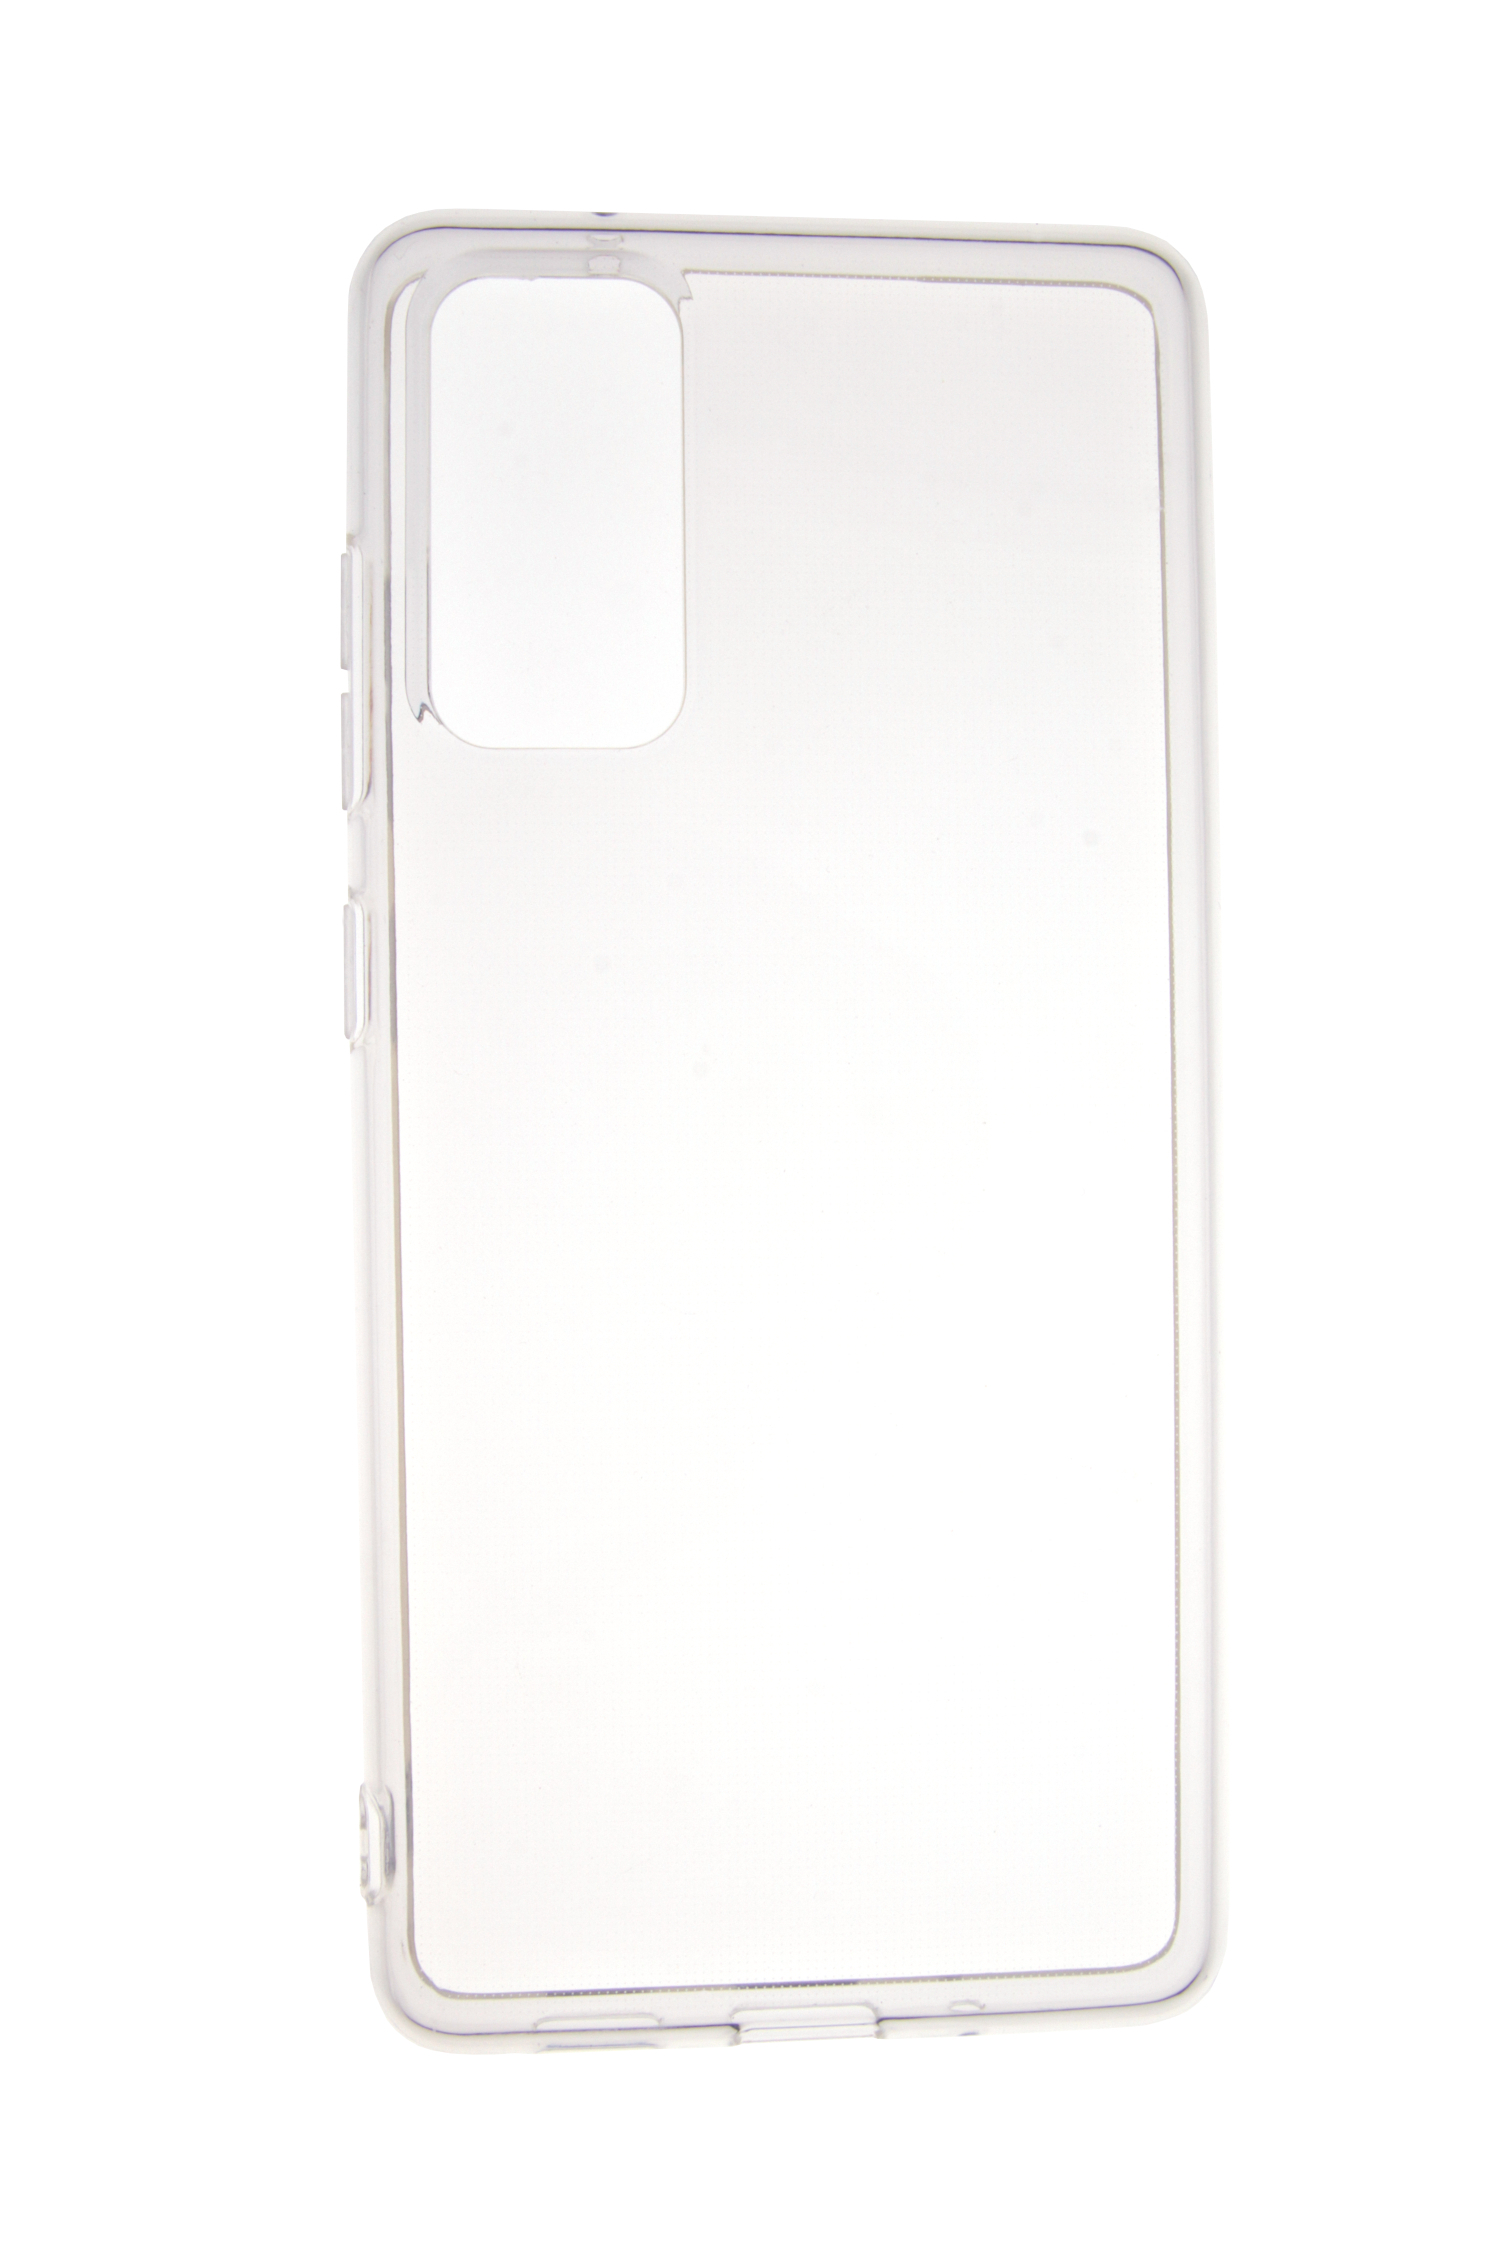 mm Galaxy JAMCOVER S20 Backcover, FE, 2.0 Strong, Transparent Case TPU Samsung,